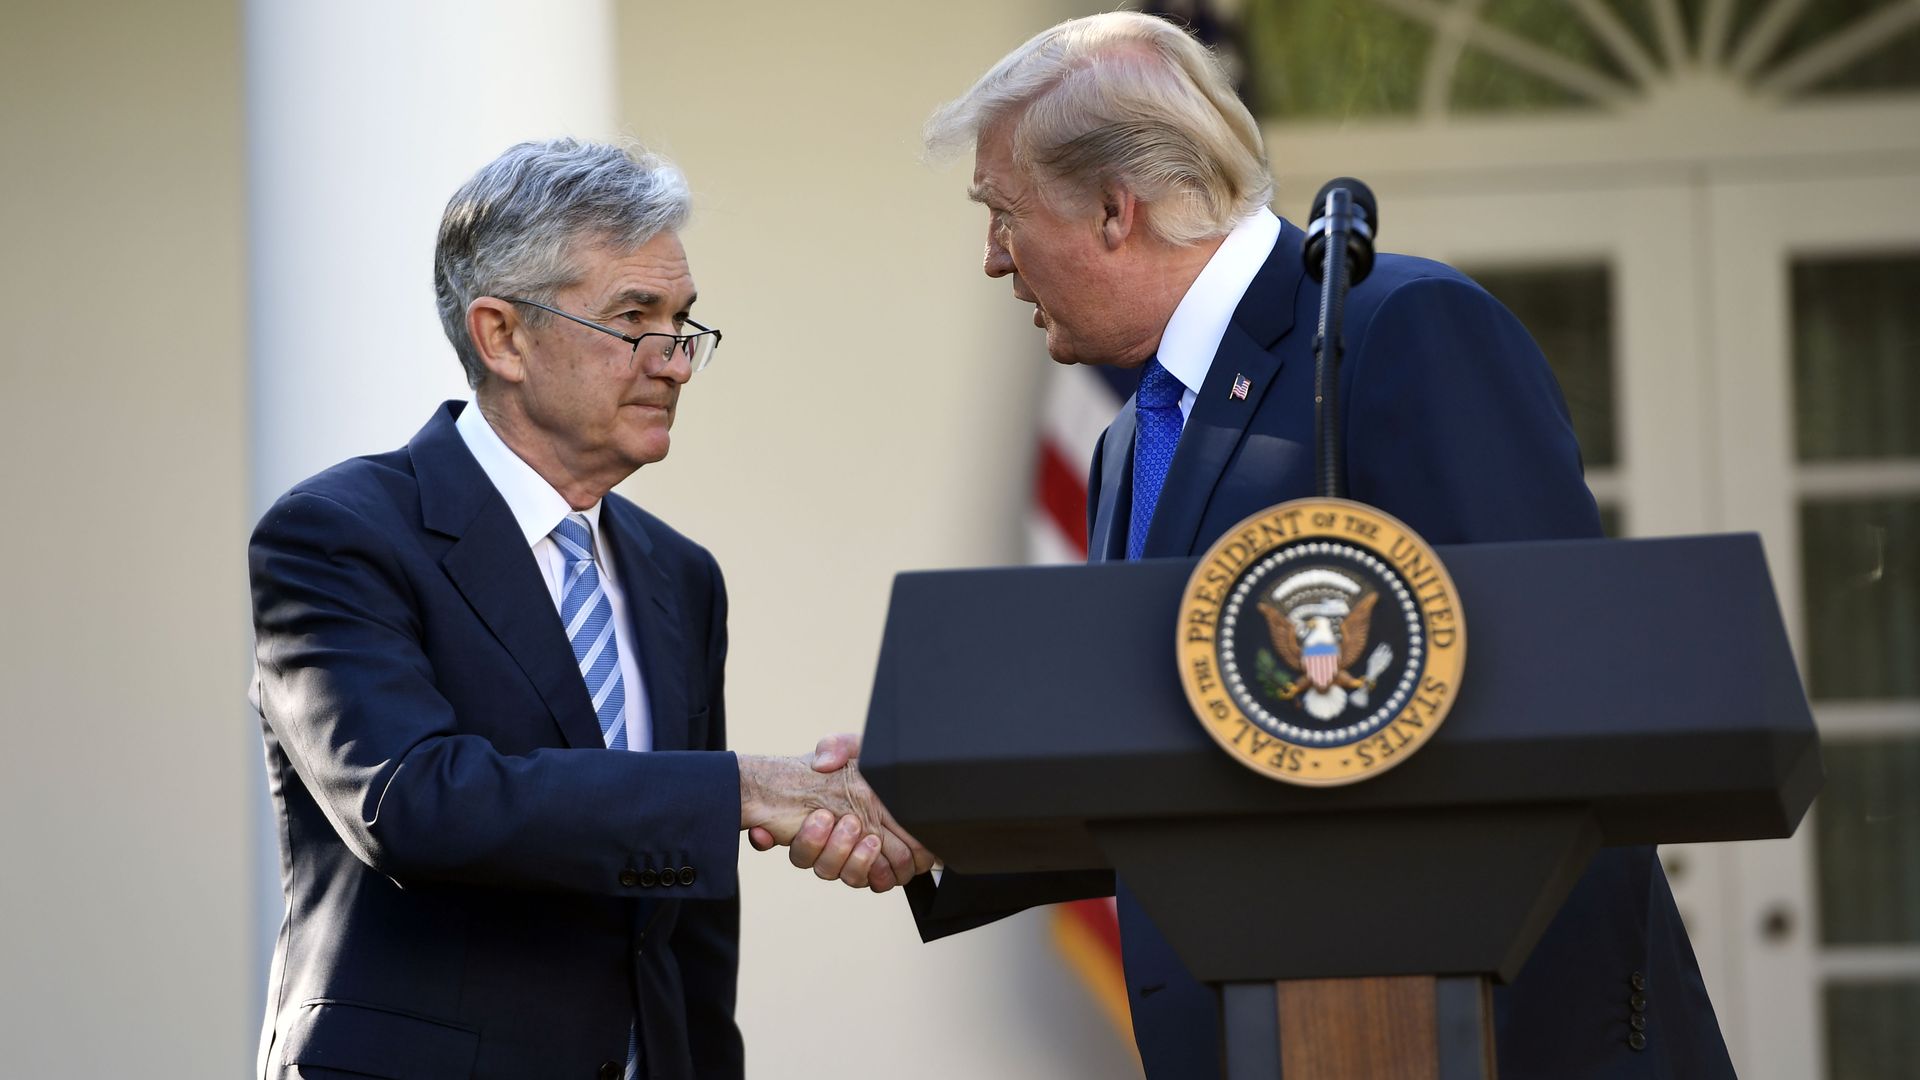 US President Donald Trump shakes hands as he announces his nominee for Chairman of the Federal Reserve, Jerome Powell, in the Rose Garden of the White House in Washington, DC, 